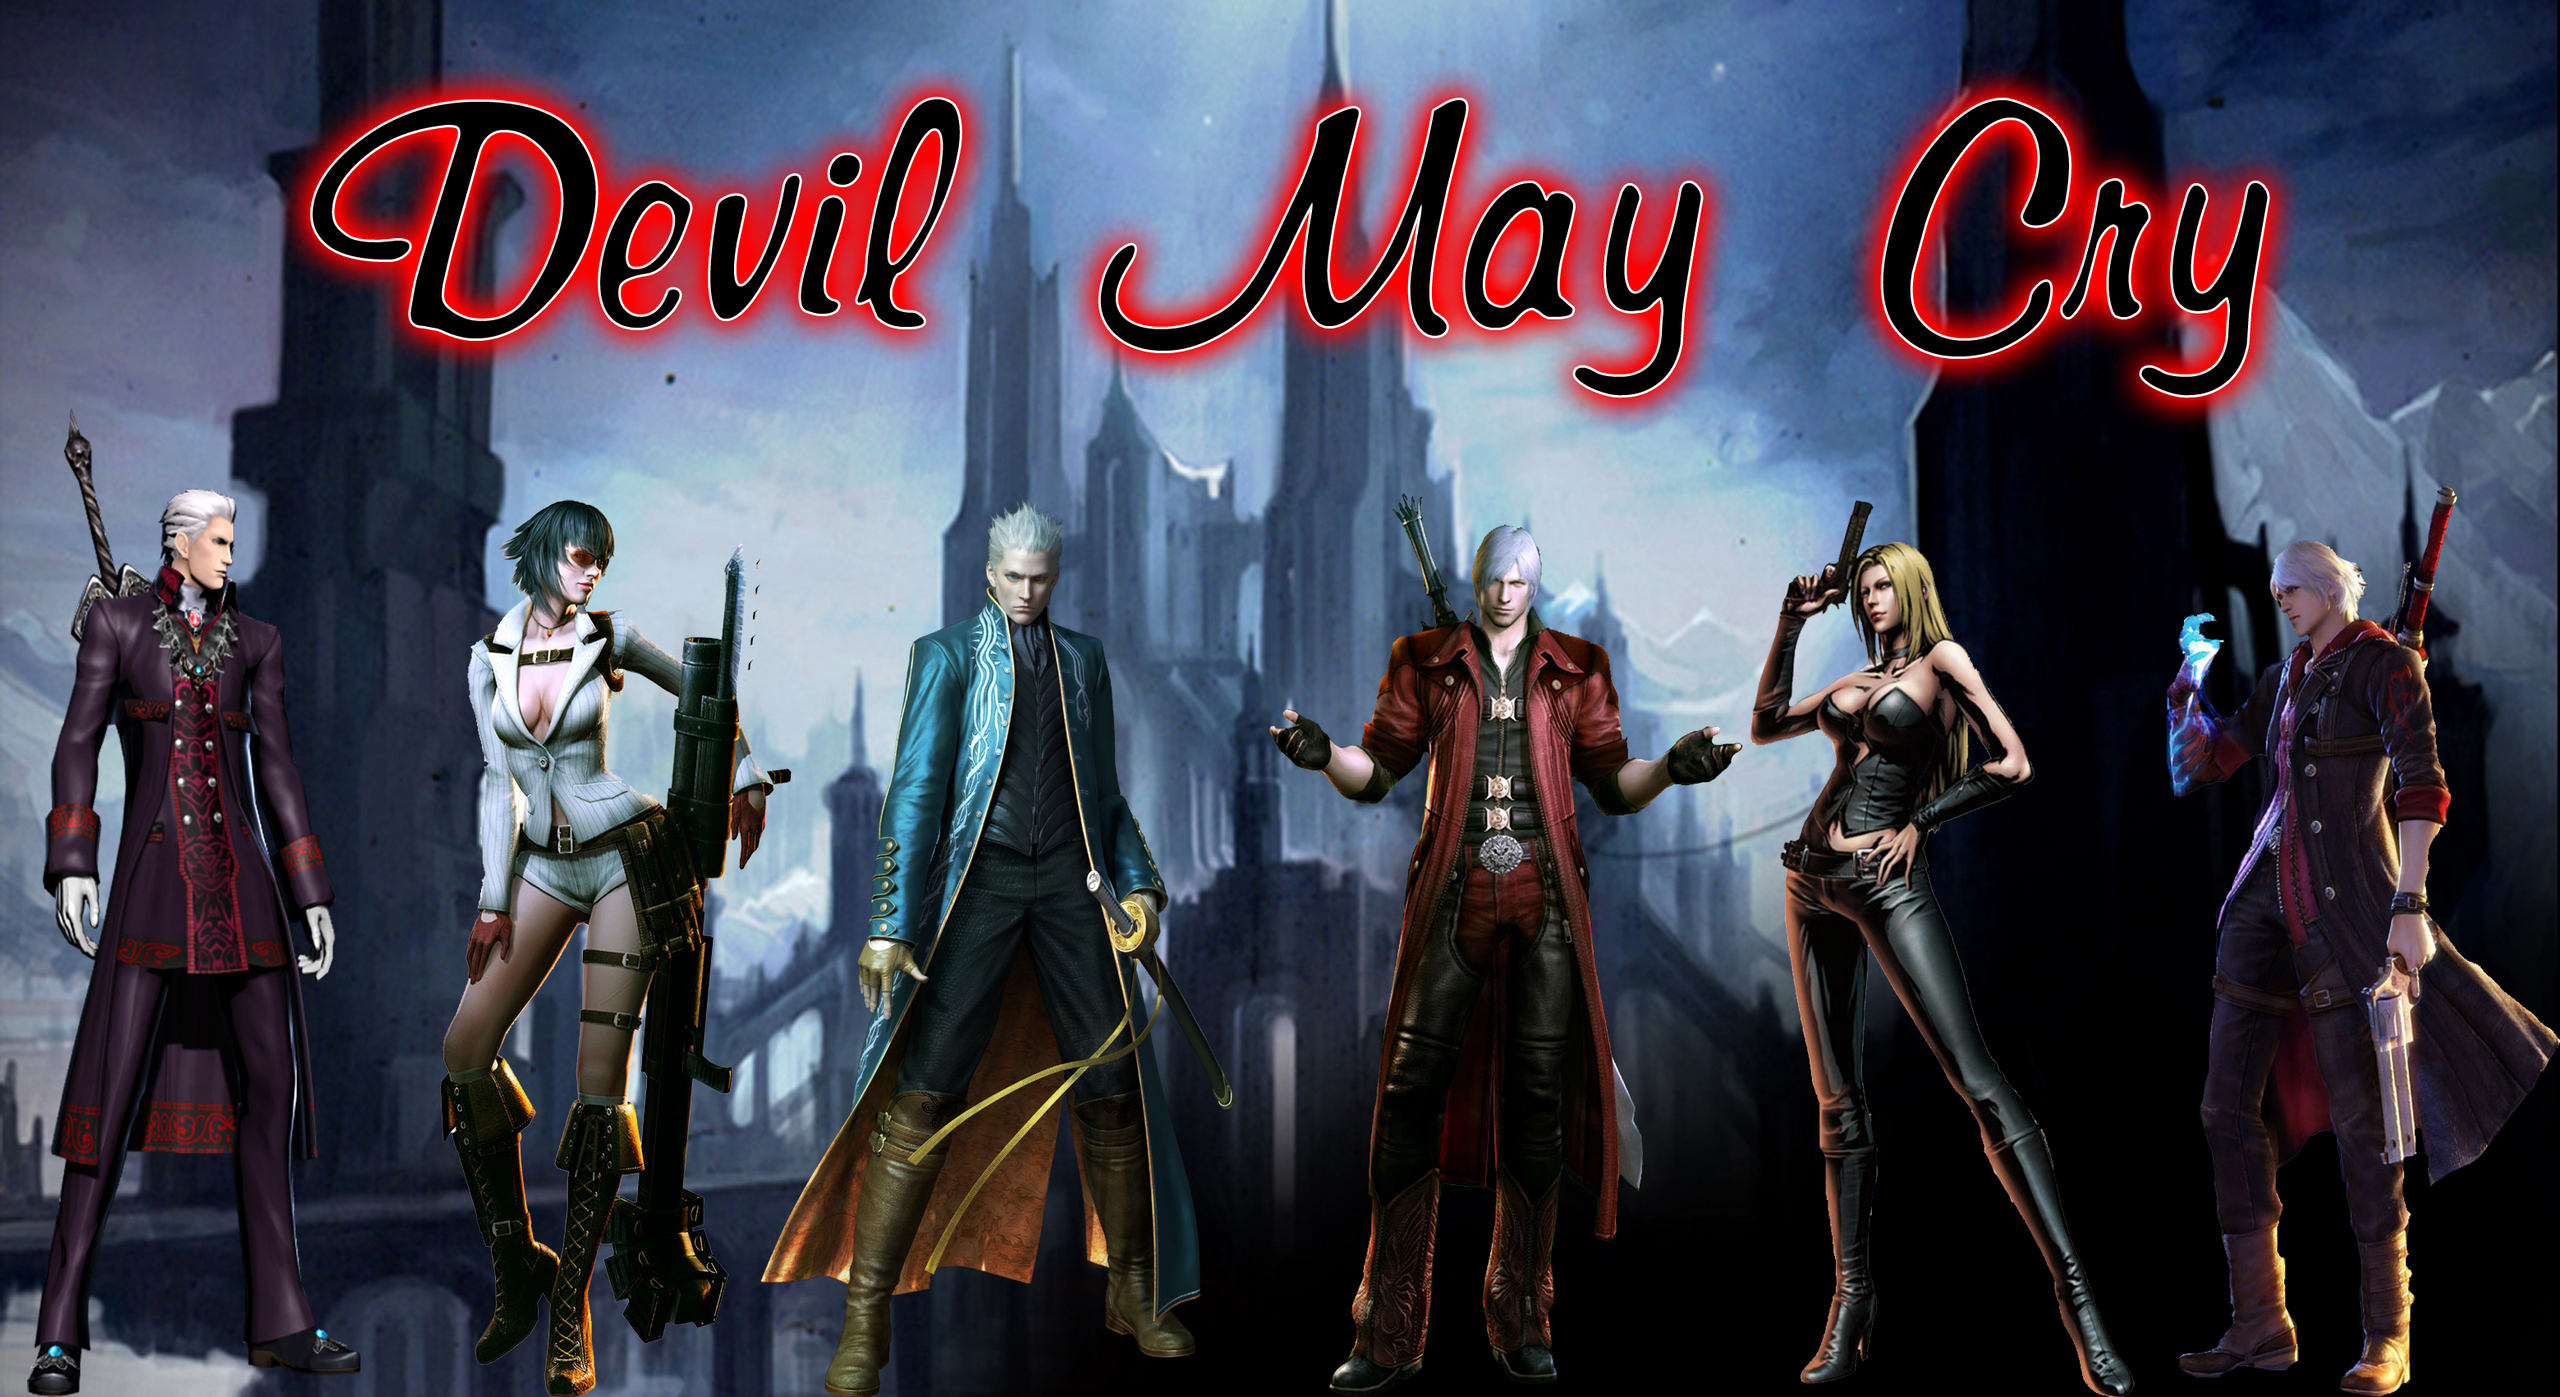 Devil May Cry dmc a wallpaper background